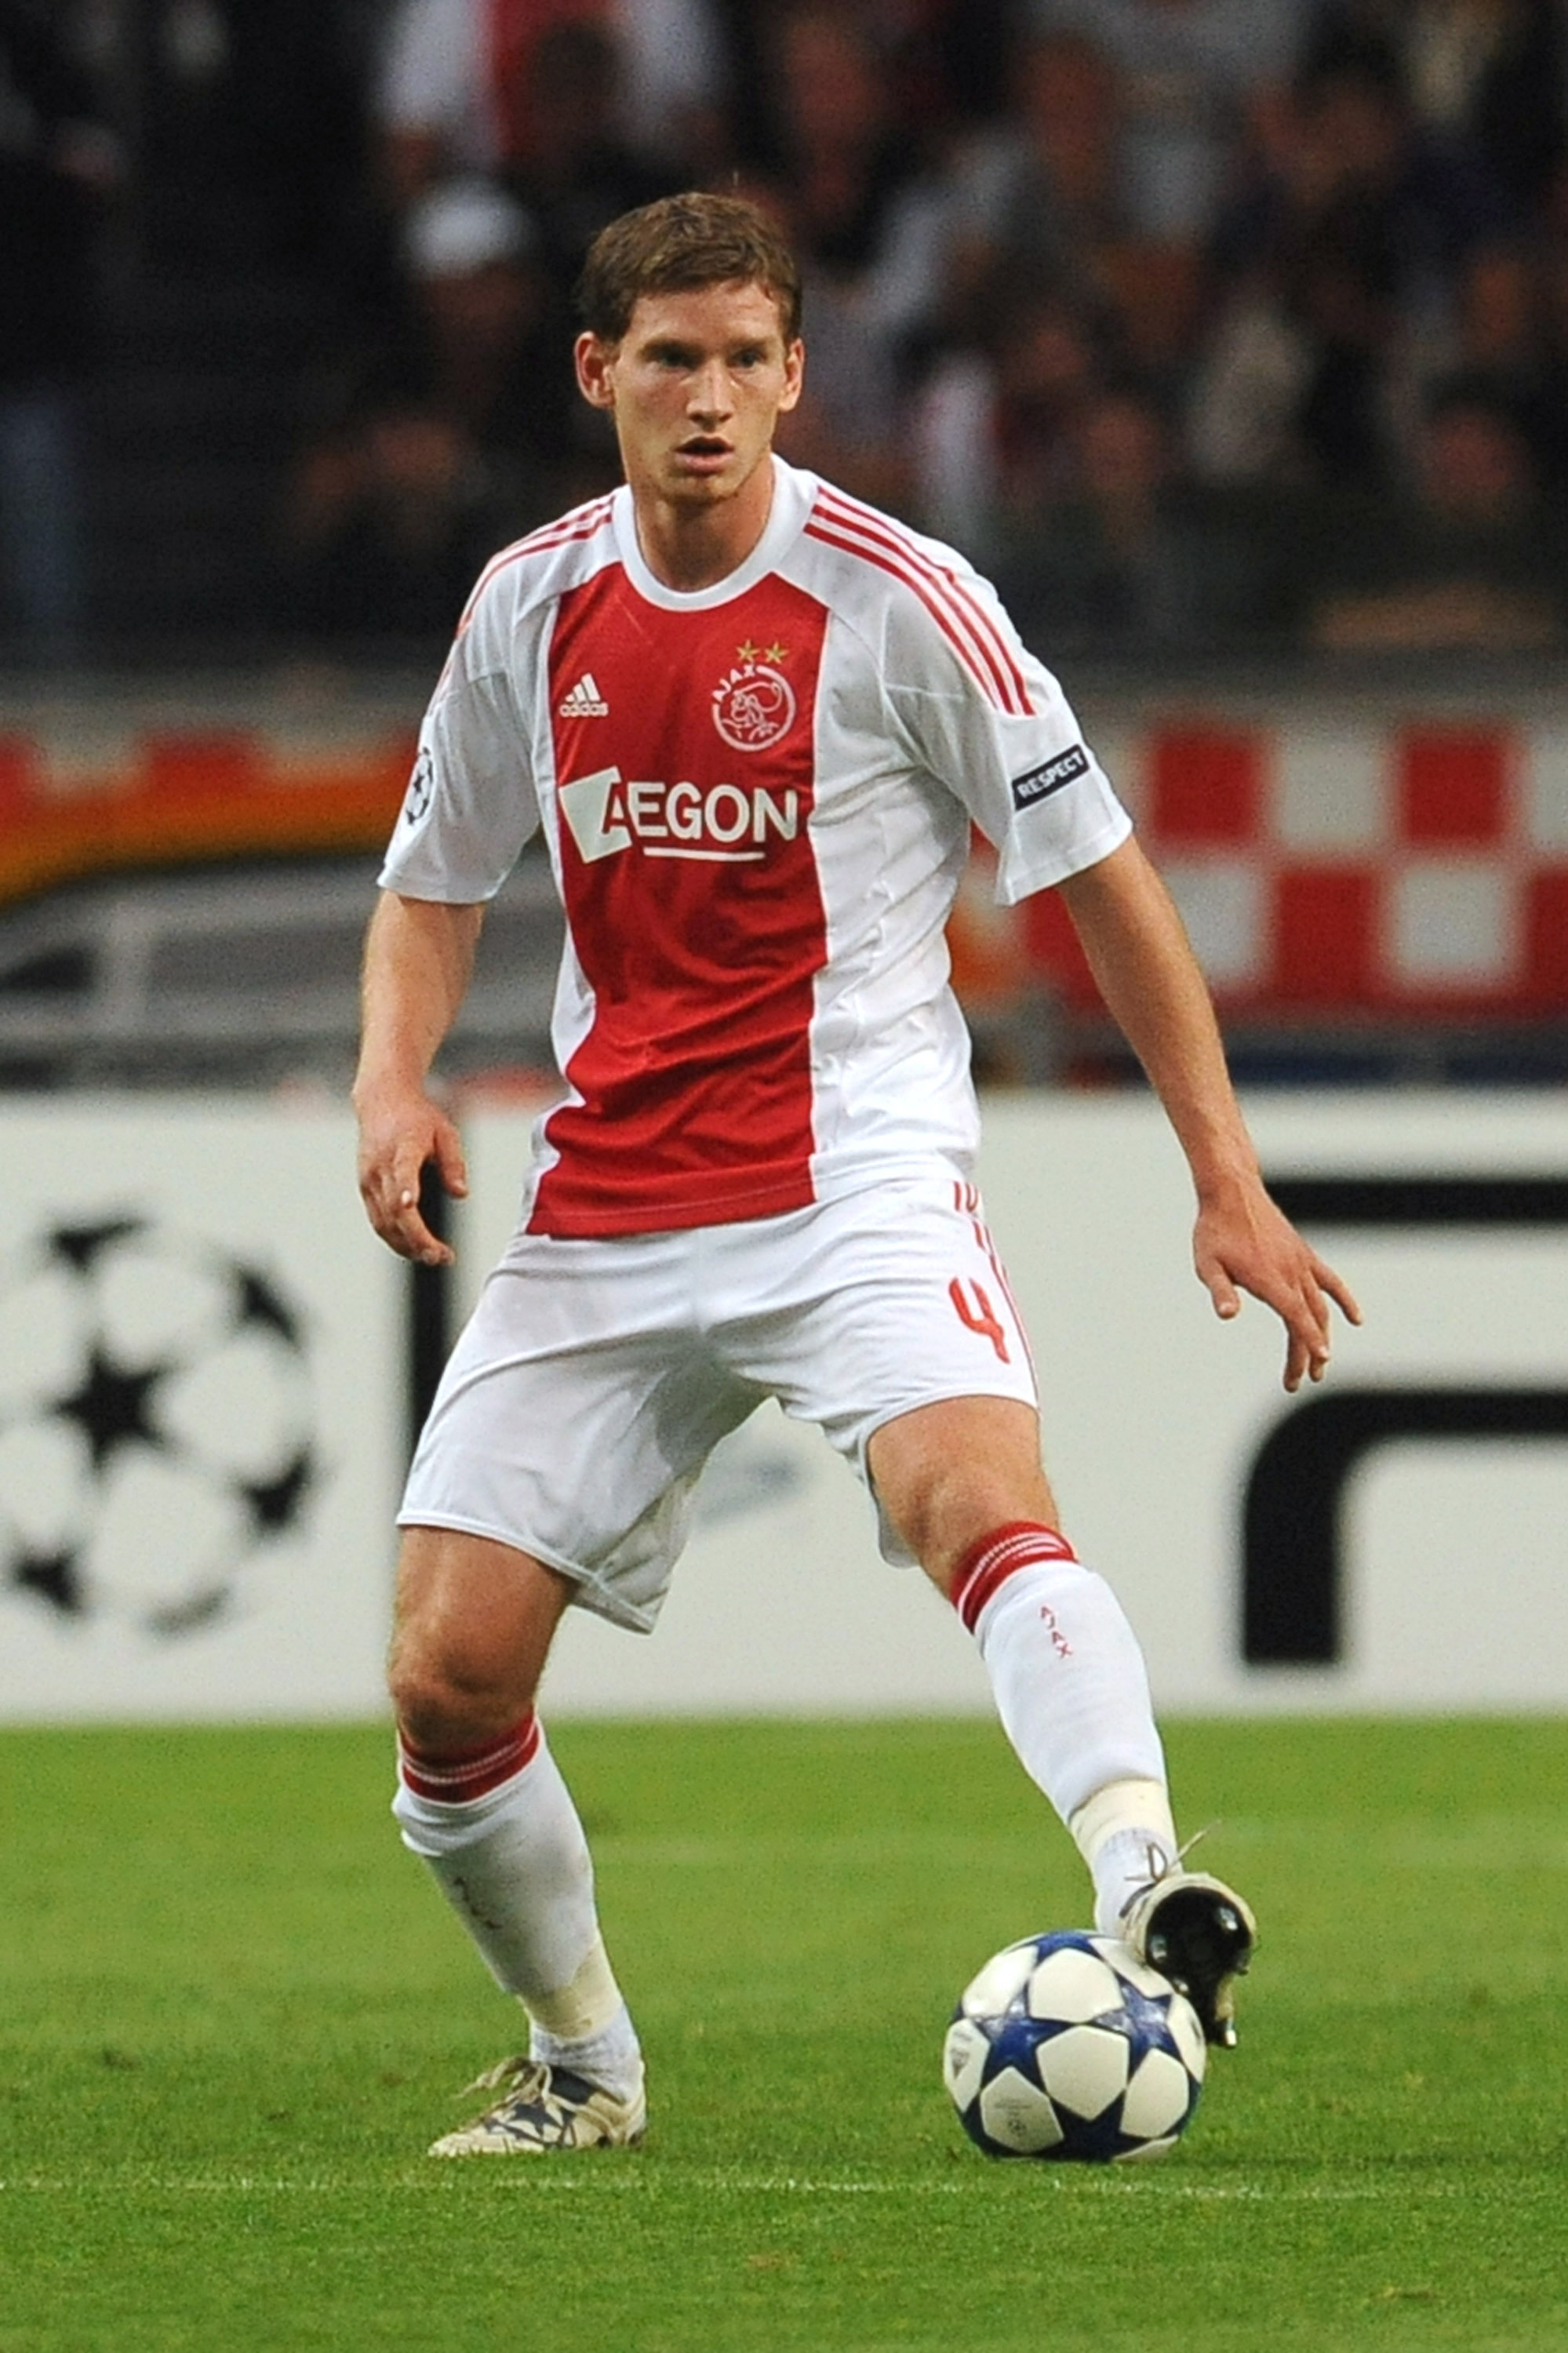 AMSTERDAM, NETHERLANDS - AUGUST 25:  Jan Vertonghen of AFC Ajax in action during the Champions League Play-off match between AFC Ajax and FC Dynamo Kiev at Amsterdam Arena on August 25, 2010 in Amsterdam, Netherlands.  (Photo by Valerio Pennicino/Getty Im